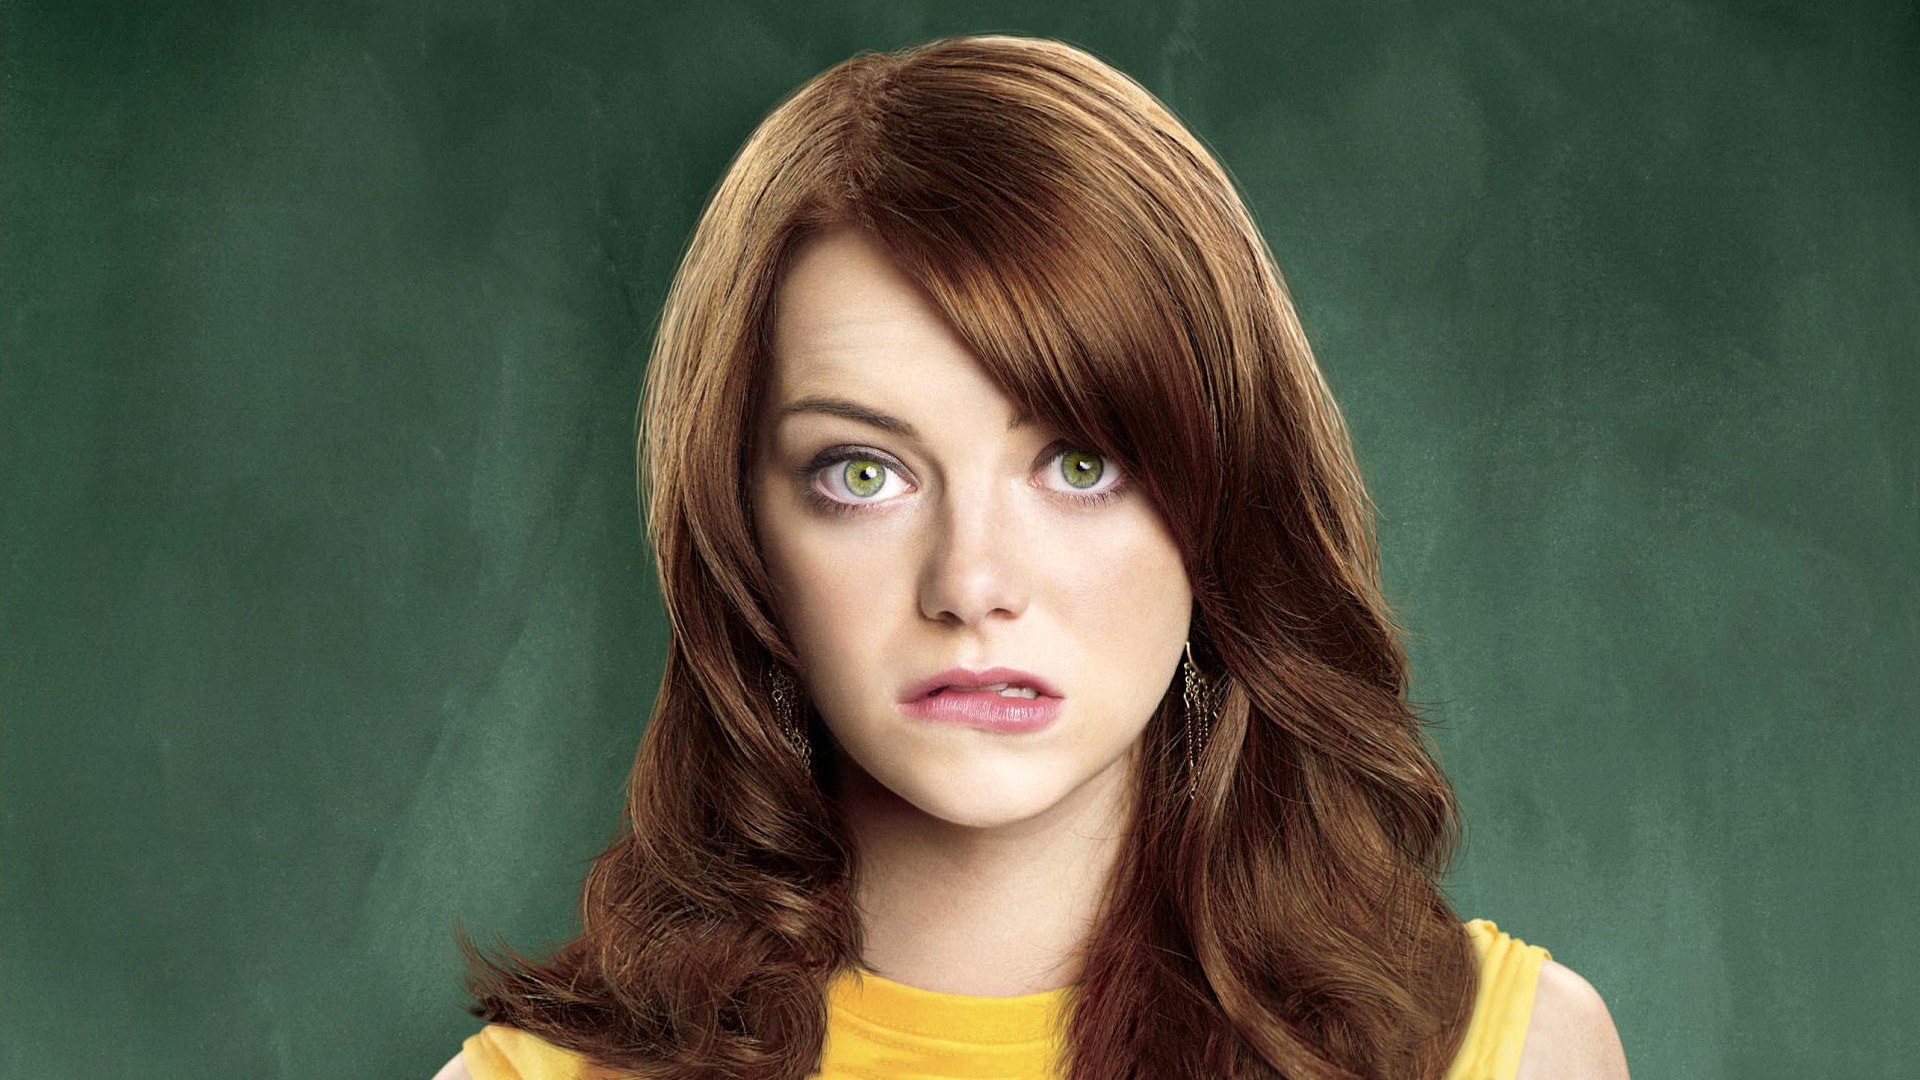 1920x1080 Emma Stone HQ wallpapers Emma Stone Pictures